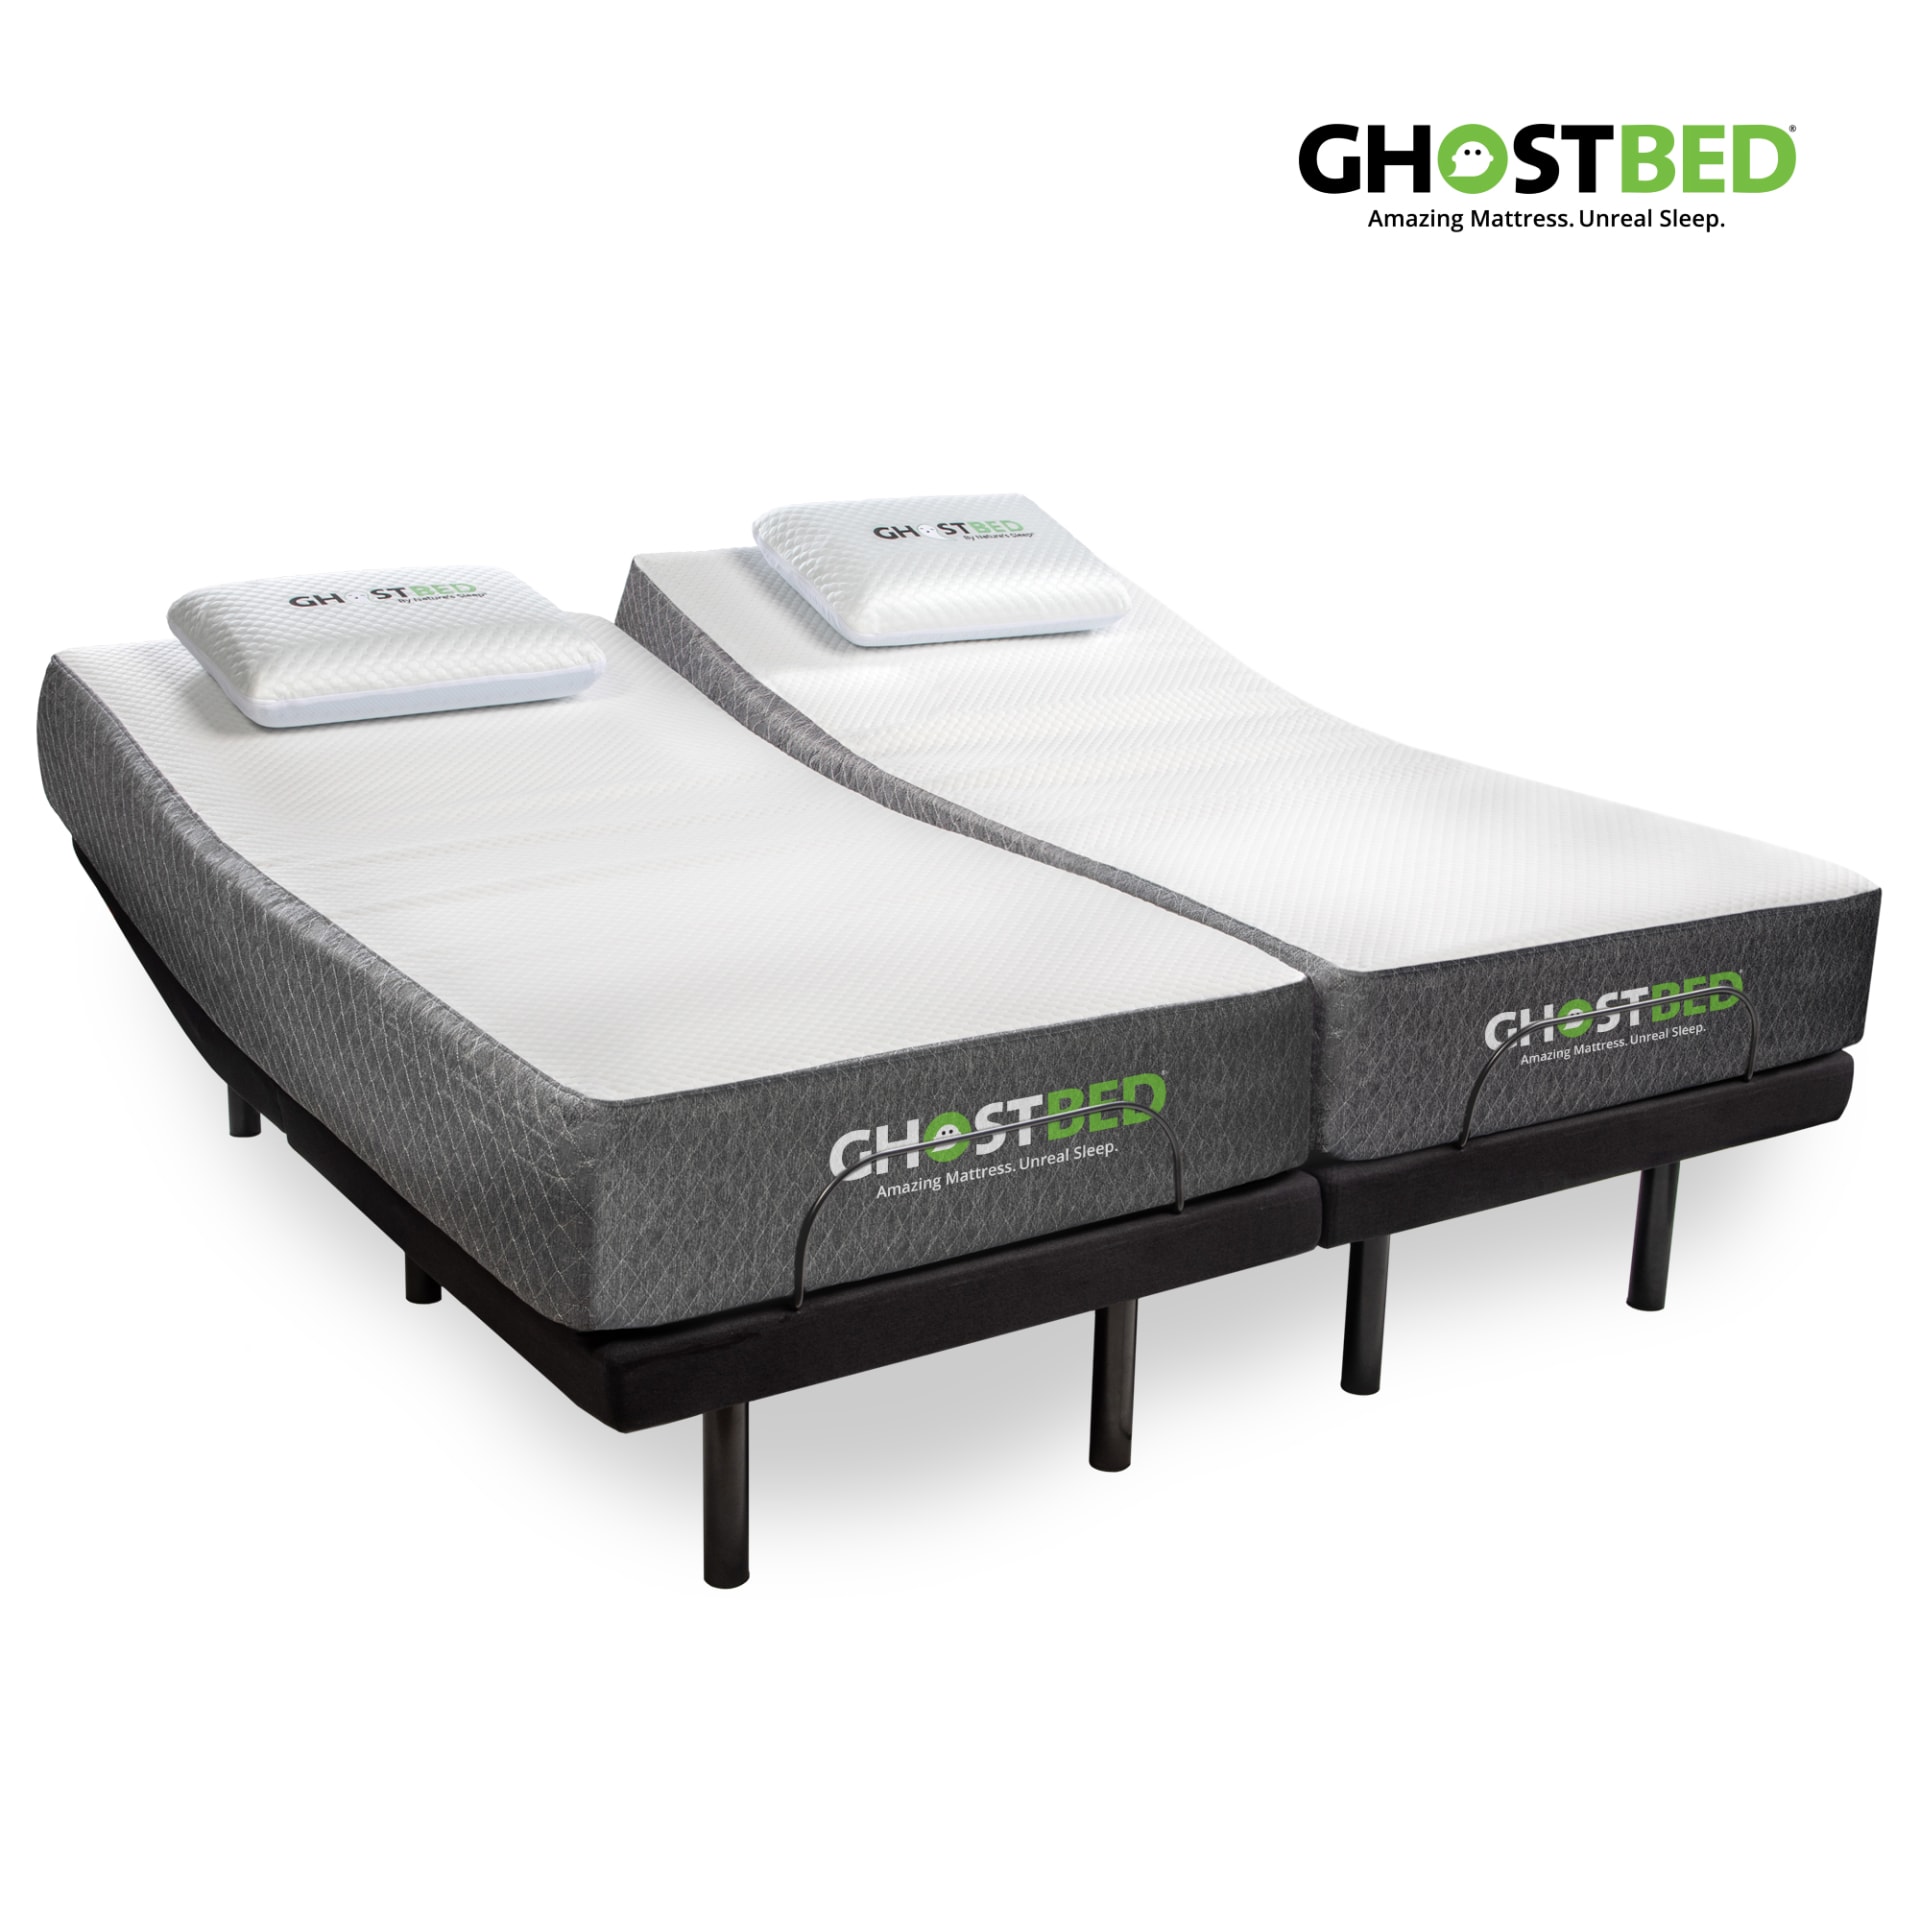 Ghostbed 11 Memory Foam Mattress With, King Bed Frame For Adjustable Base